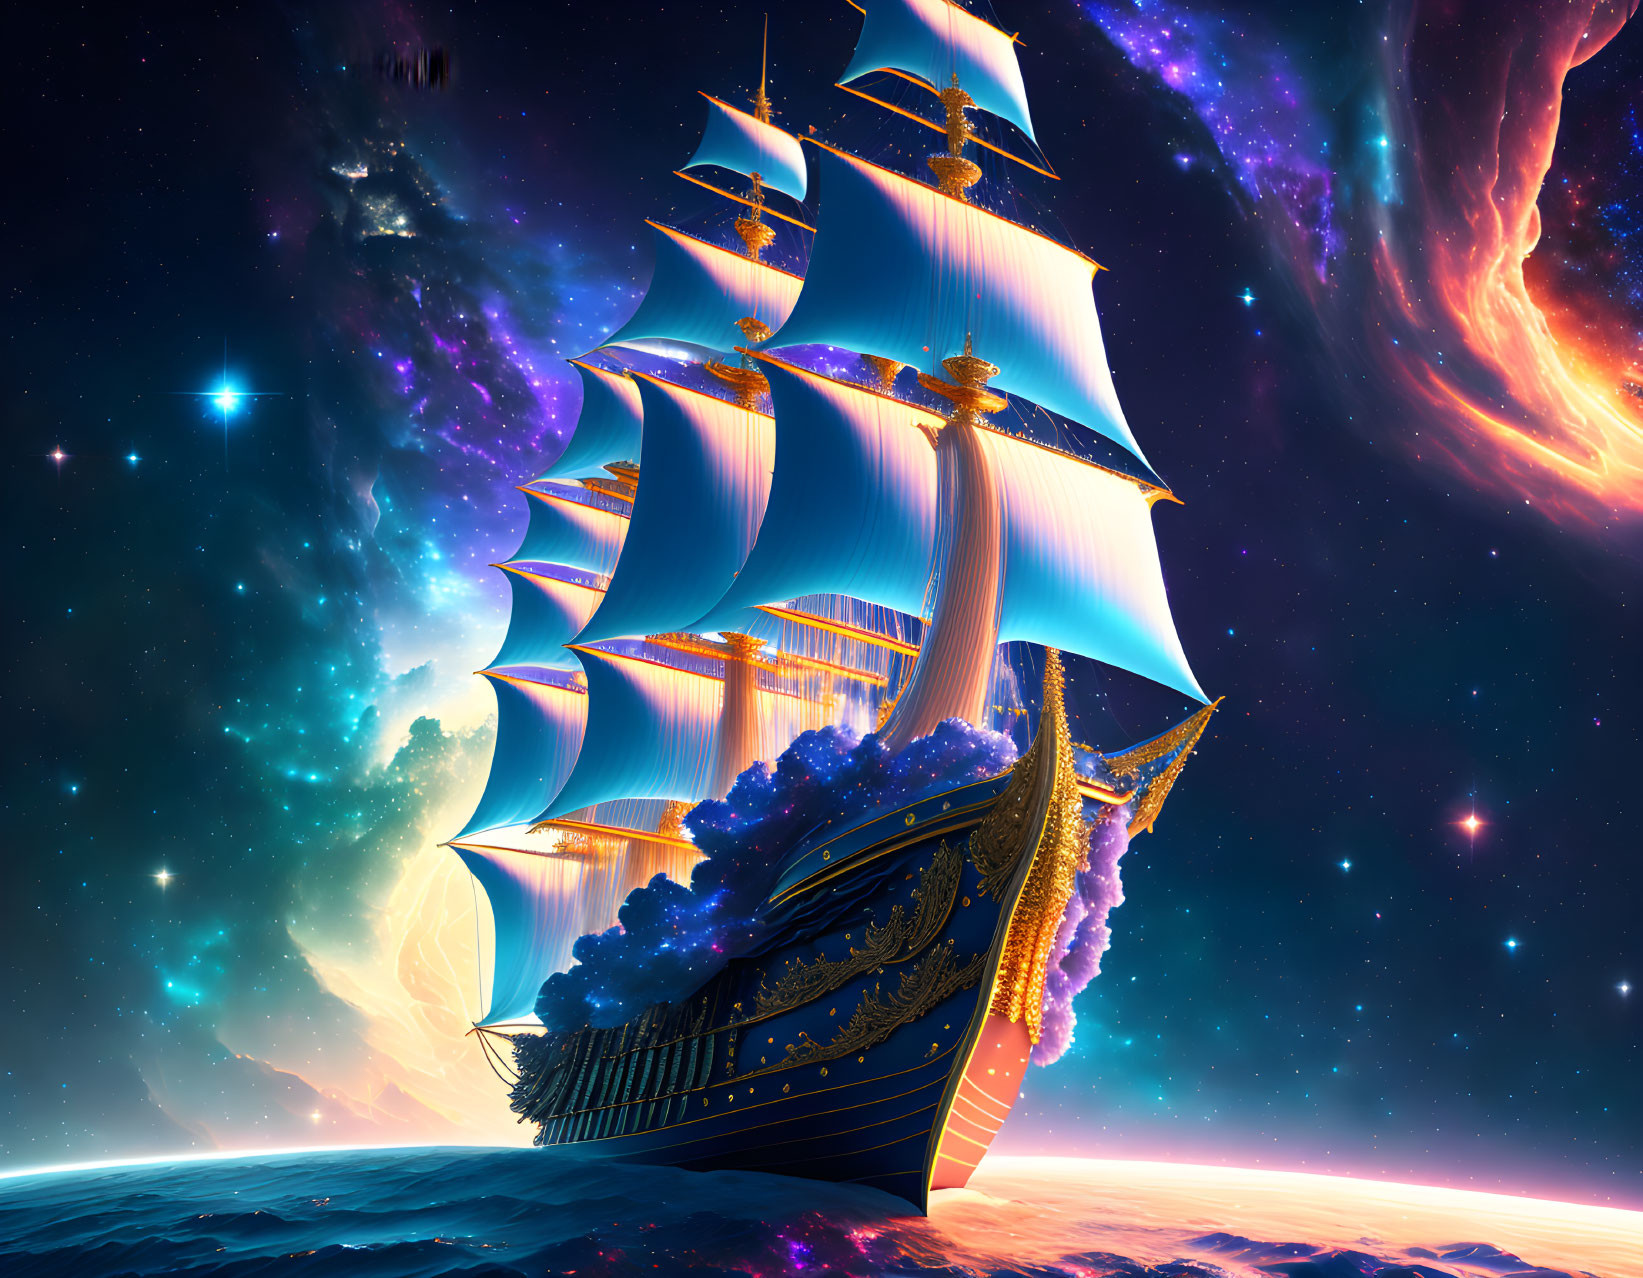 Sailing ship with billowing sails in vibrant cosmic seascape